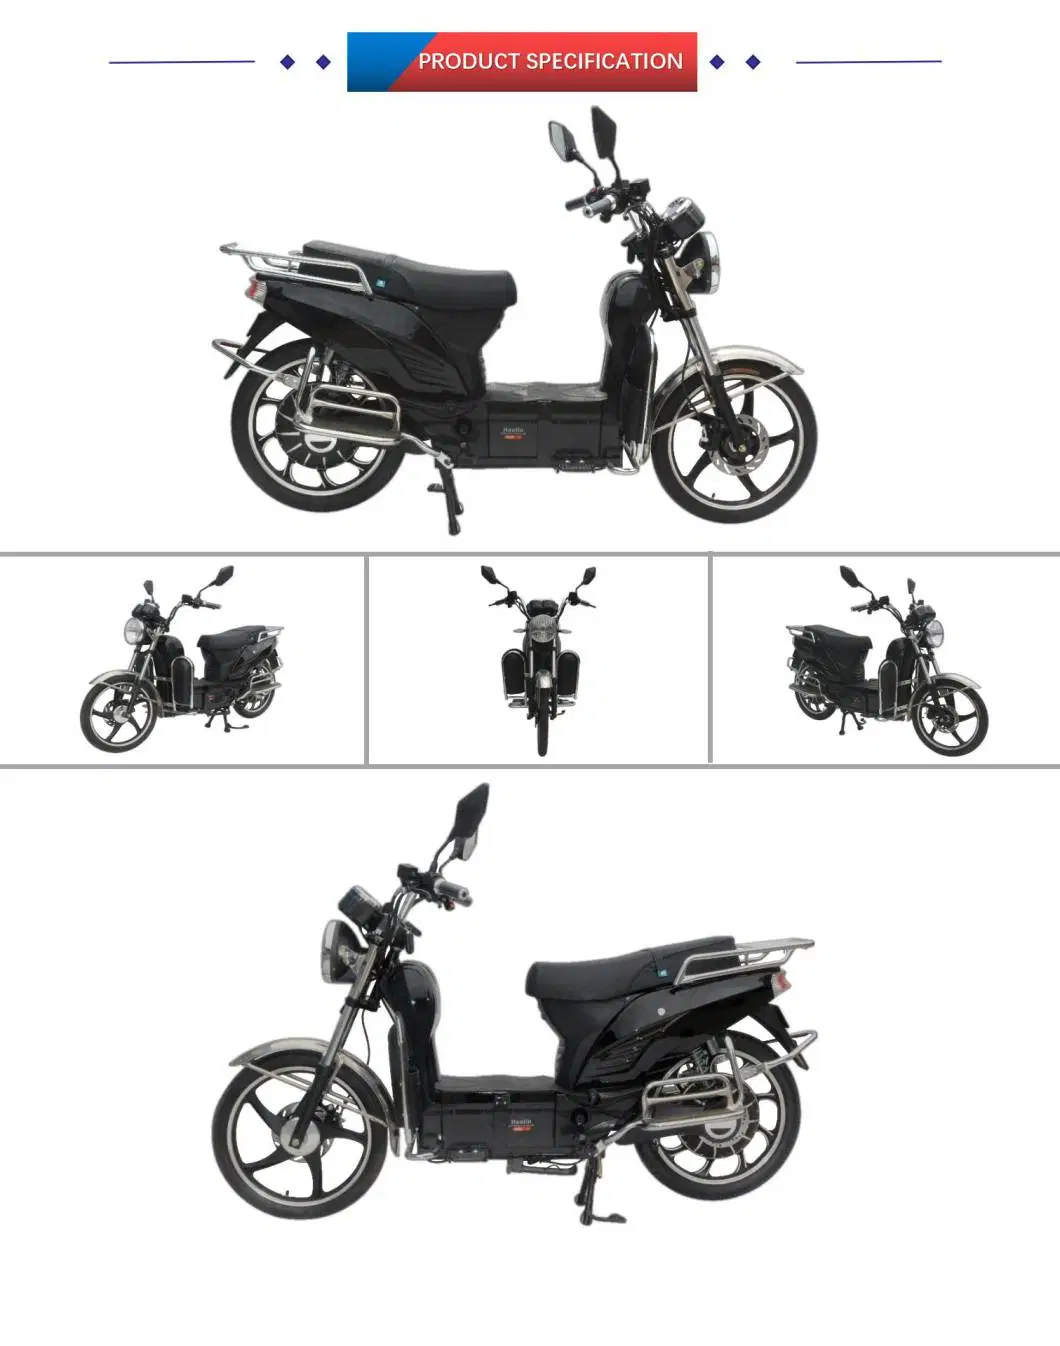 Original Speed 40km/H Pedal Assist Electric Motorcycle/Electric Bike for Daily Motorcycle